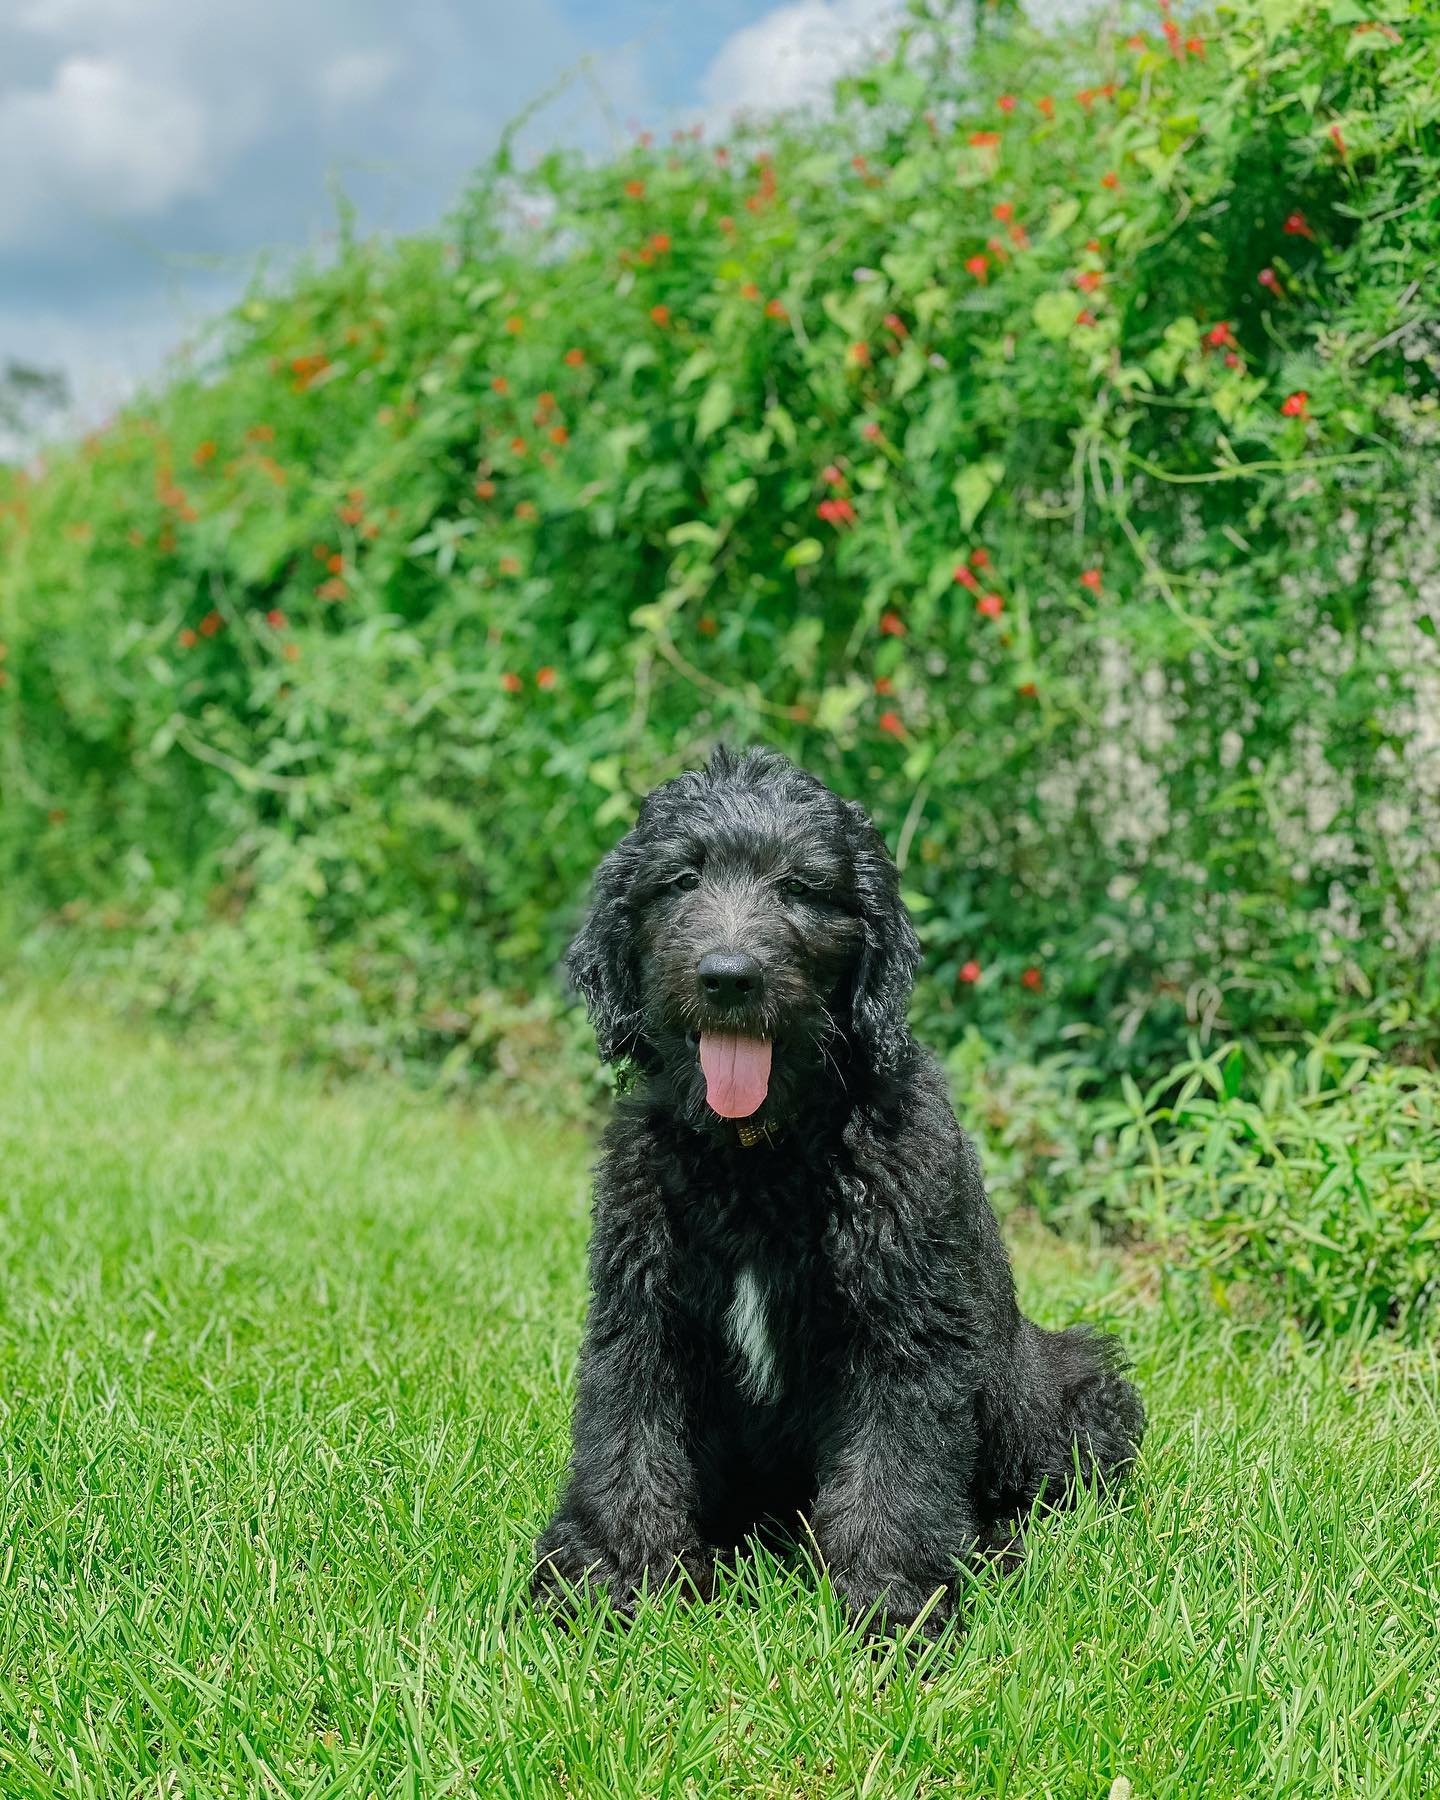 This is an image of a black golden doodle sitting in a field. These dogs are great for families with allergies, as they are allergy-friendly. They are also great for training, as they are very intelligent and easy to train.